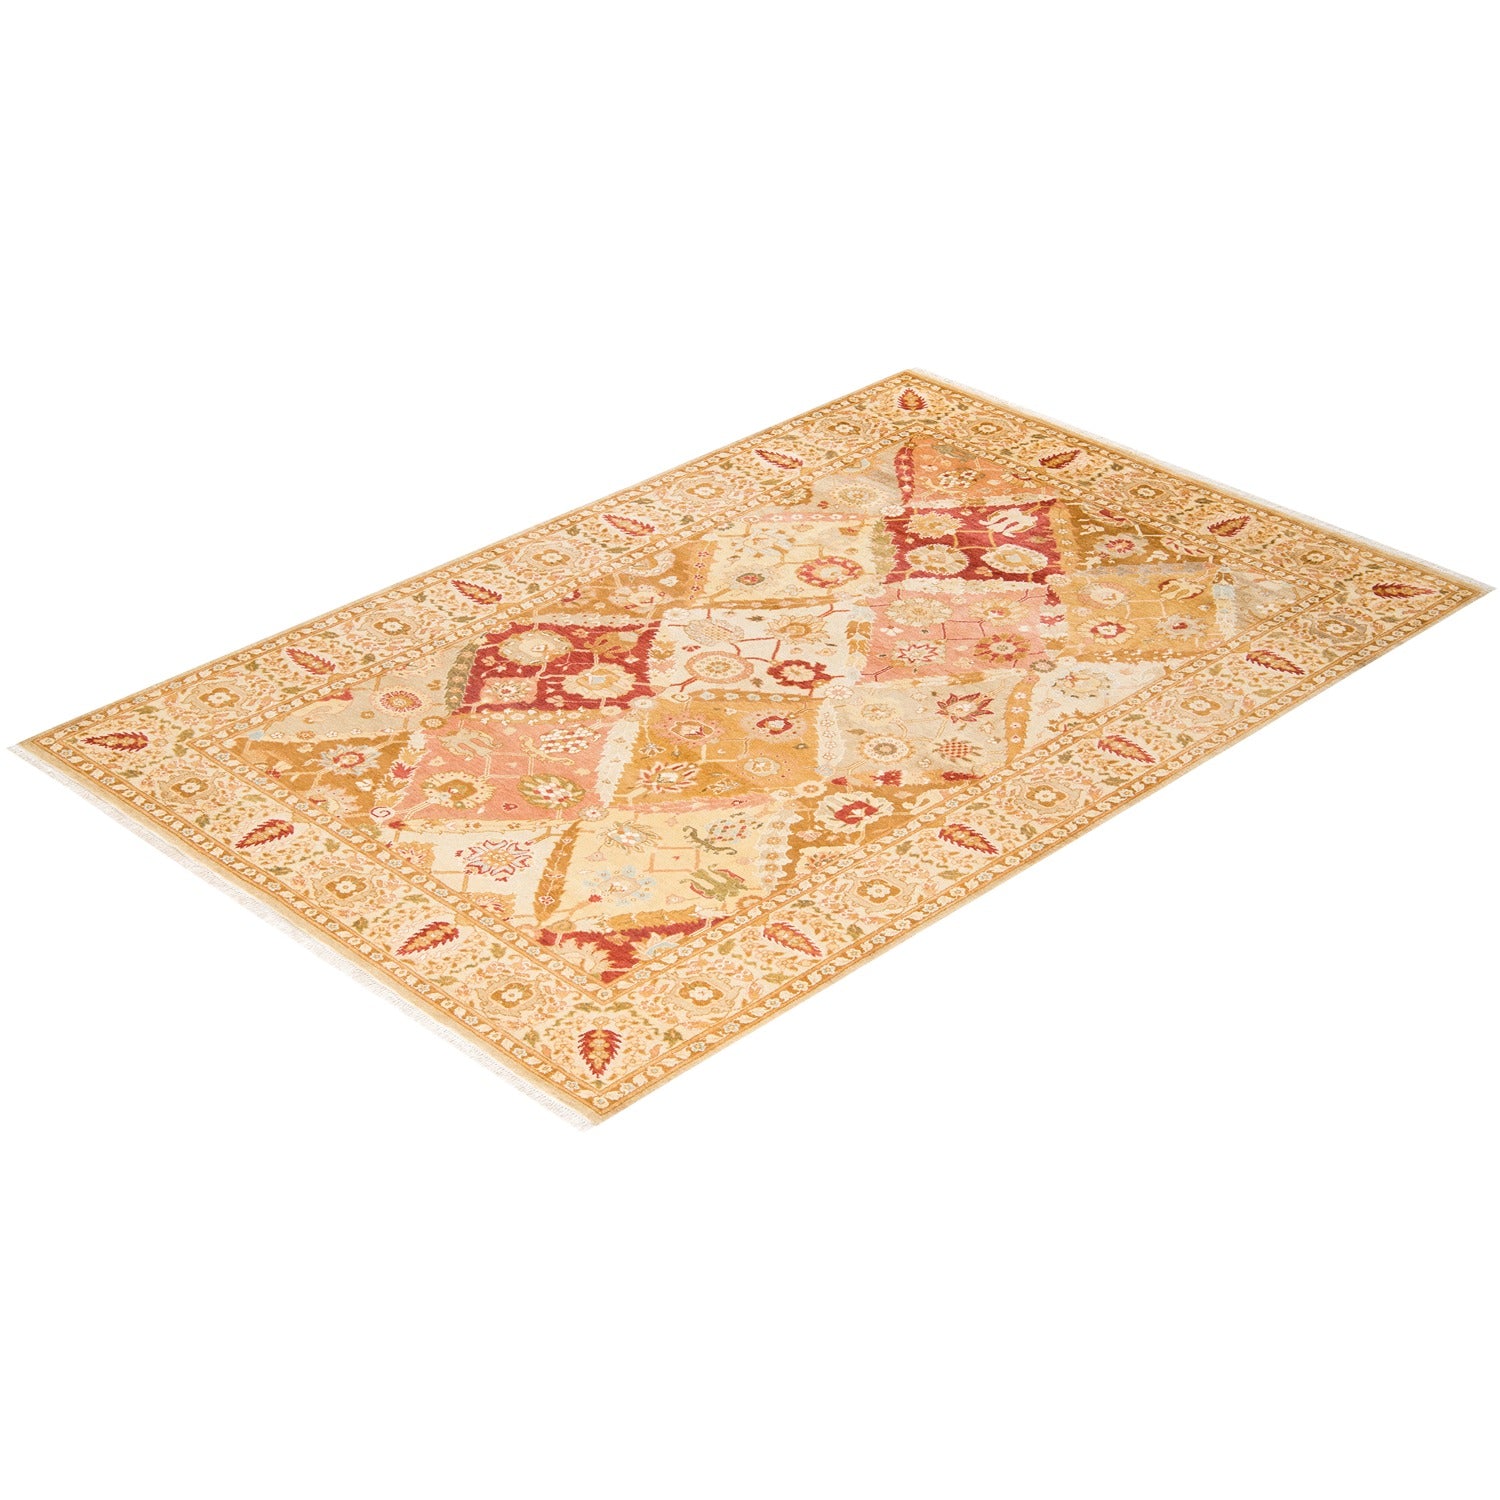 An intricately designed oriental-style rug with rich colors and vintage aesthetic.